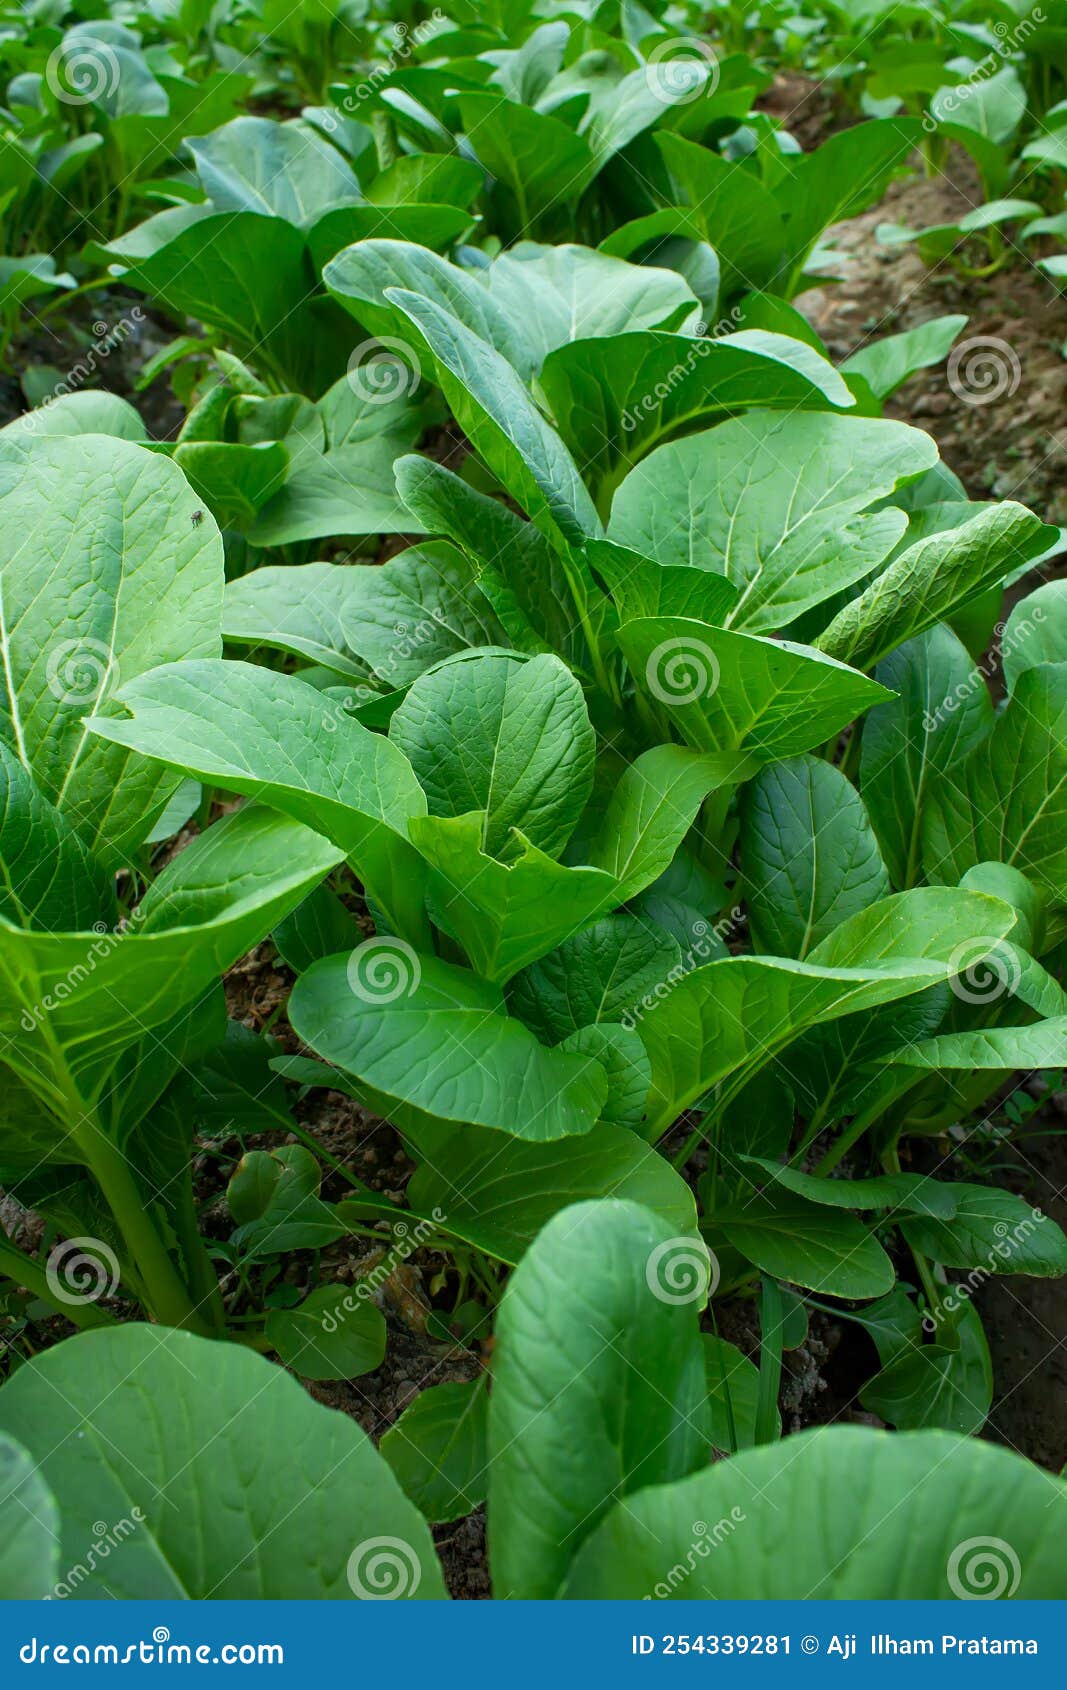 Curly Leaf Mustard Greens Stock Photo - Download Image Now